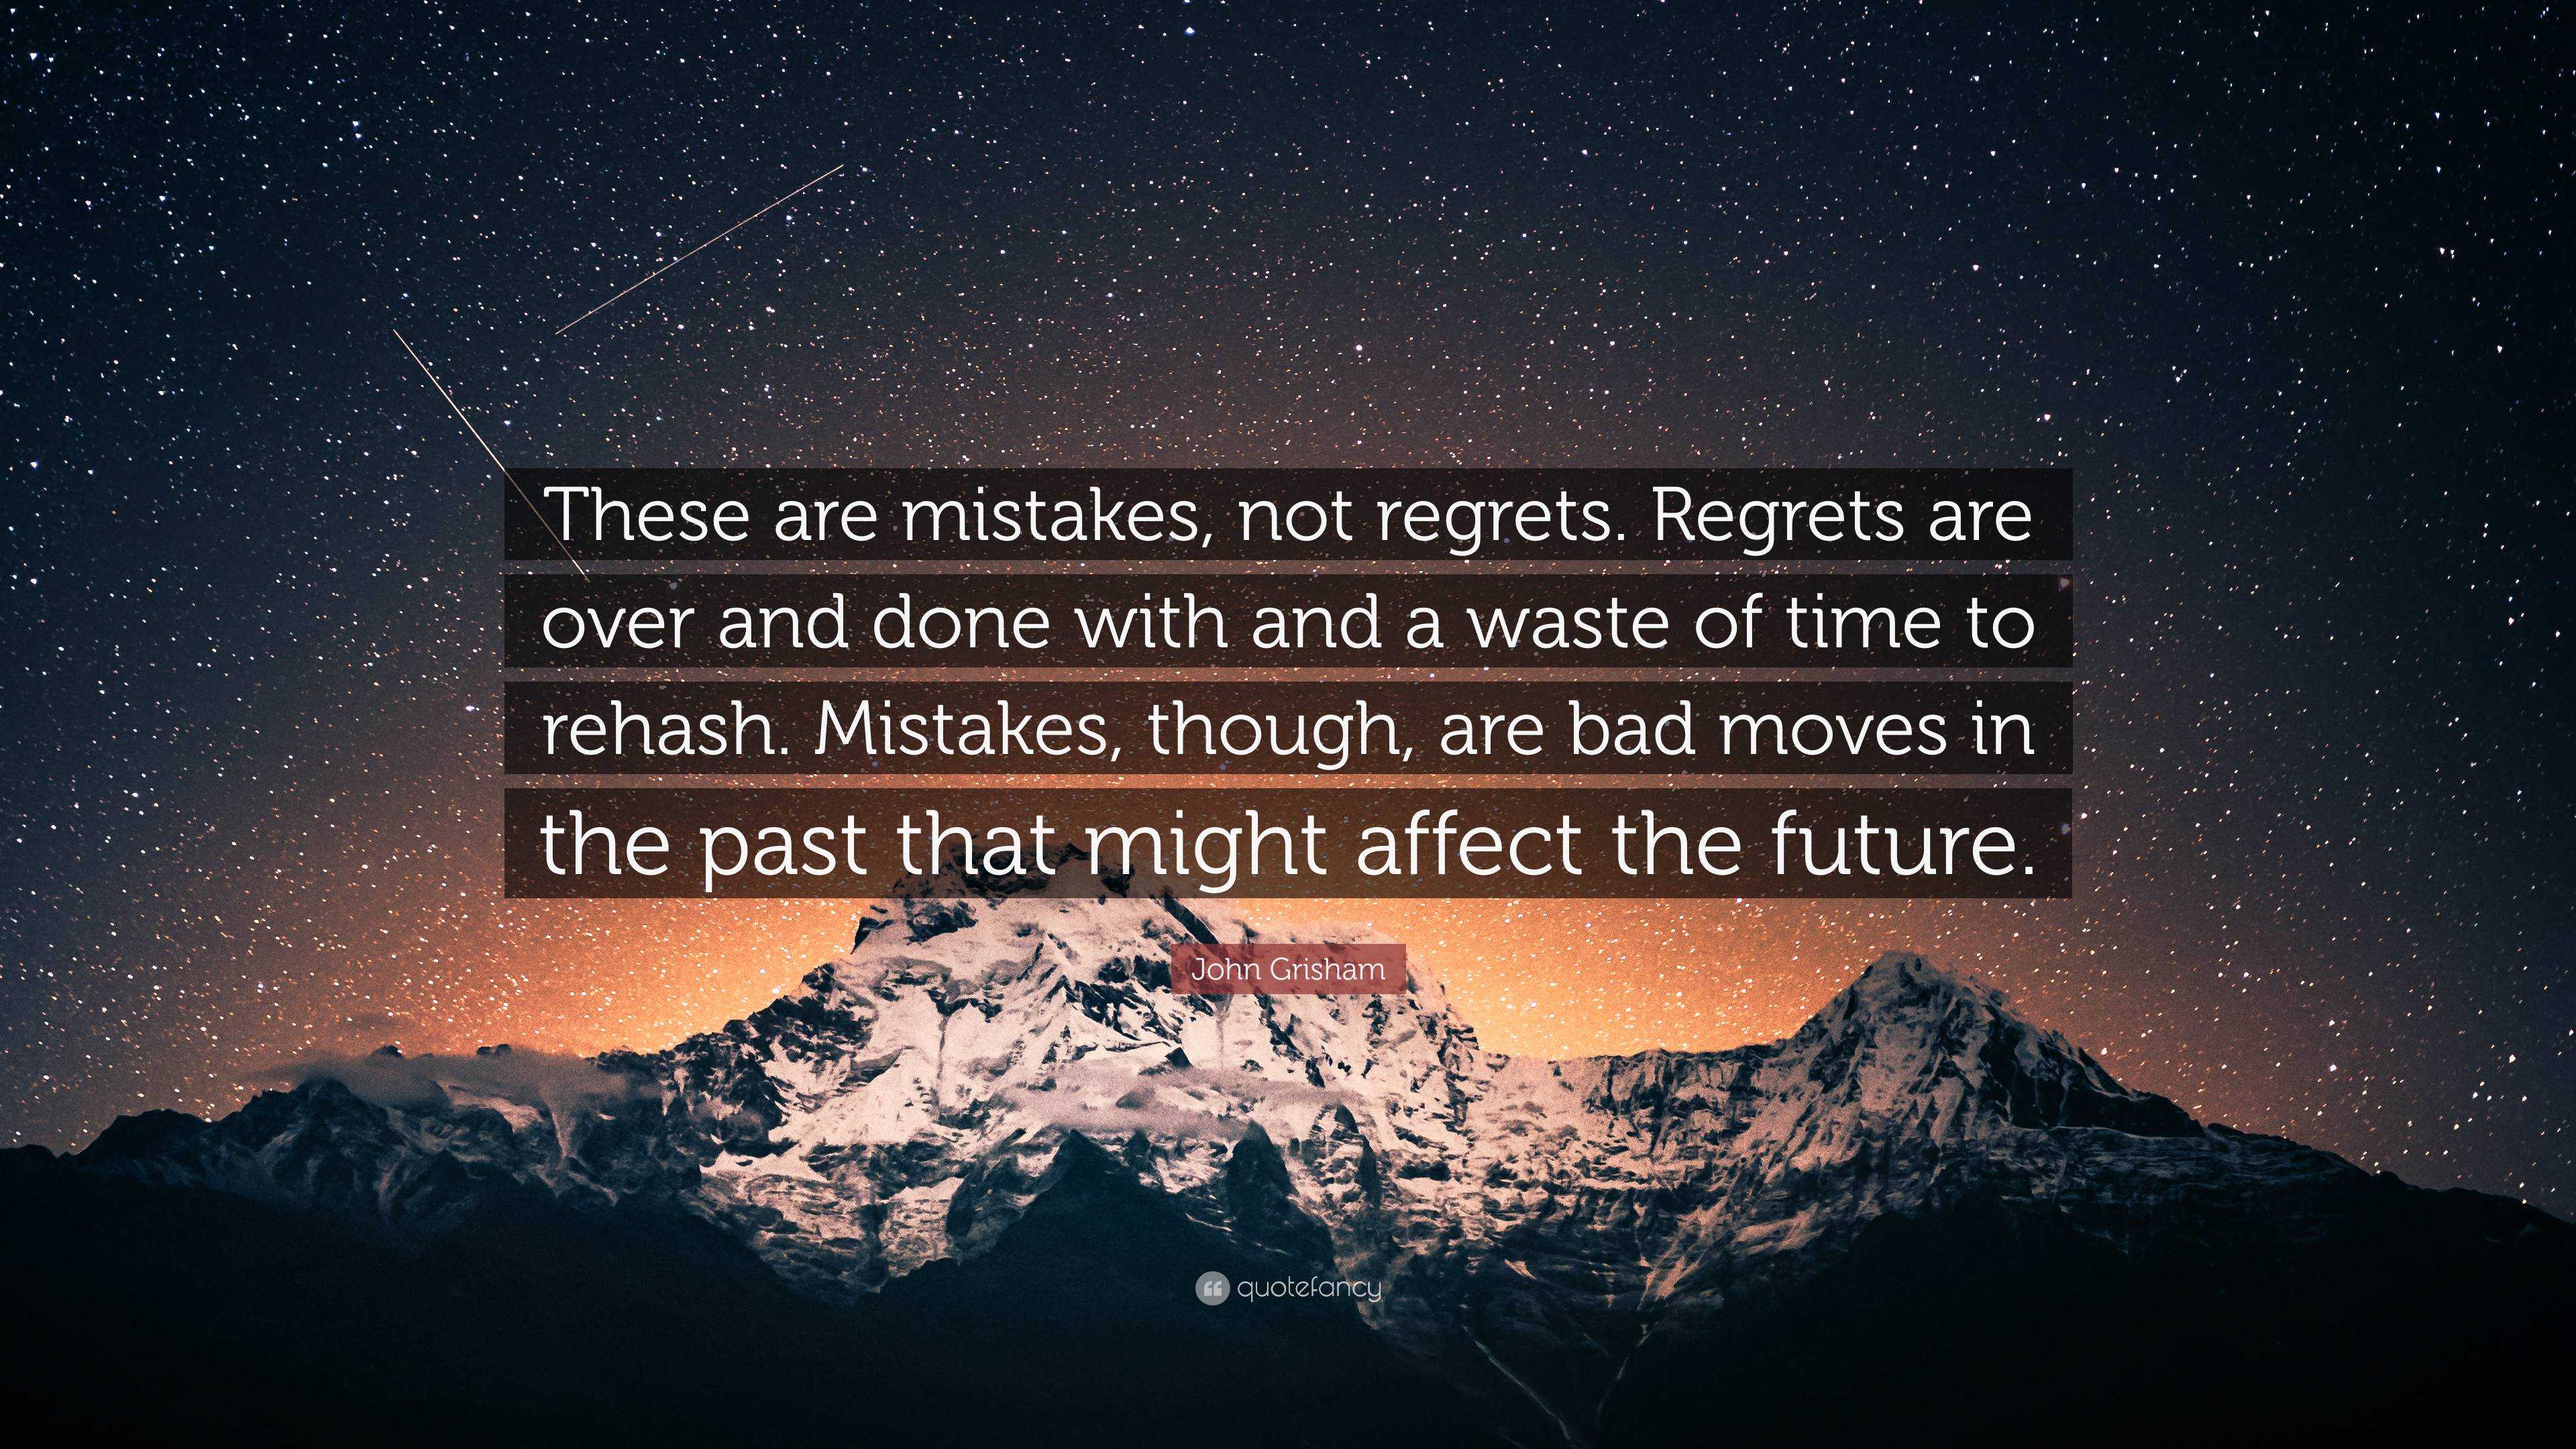 John Grisham Quote: “These are mistakes, not regrets. Regrets are